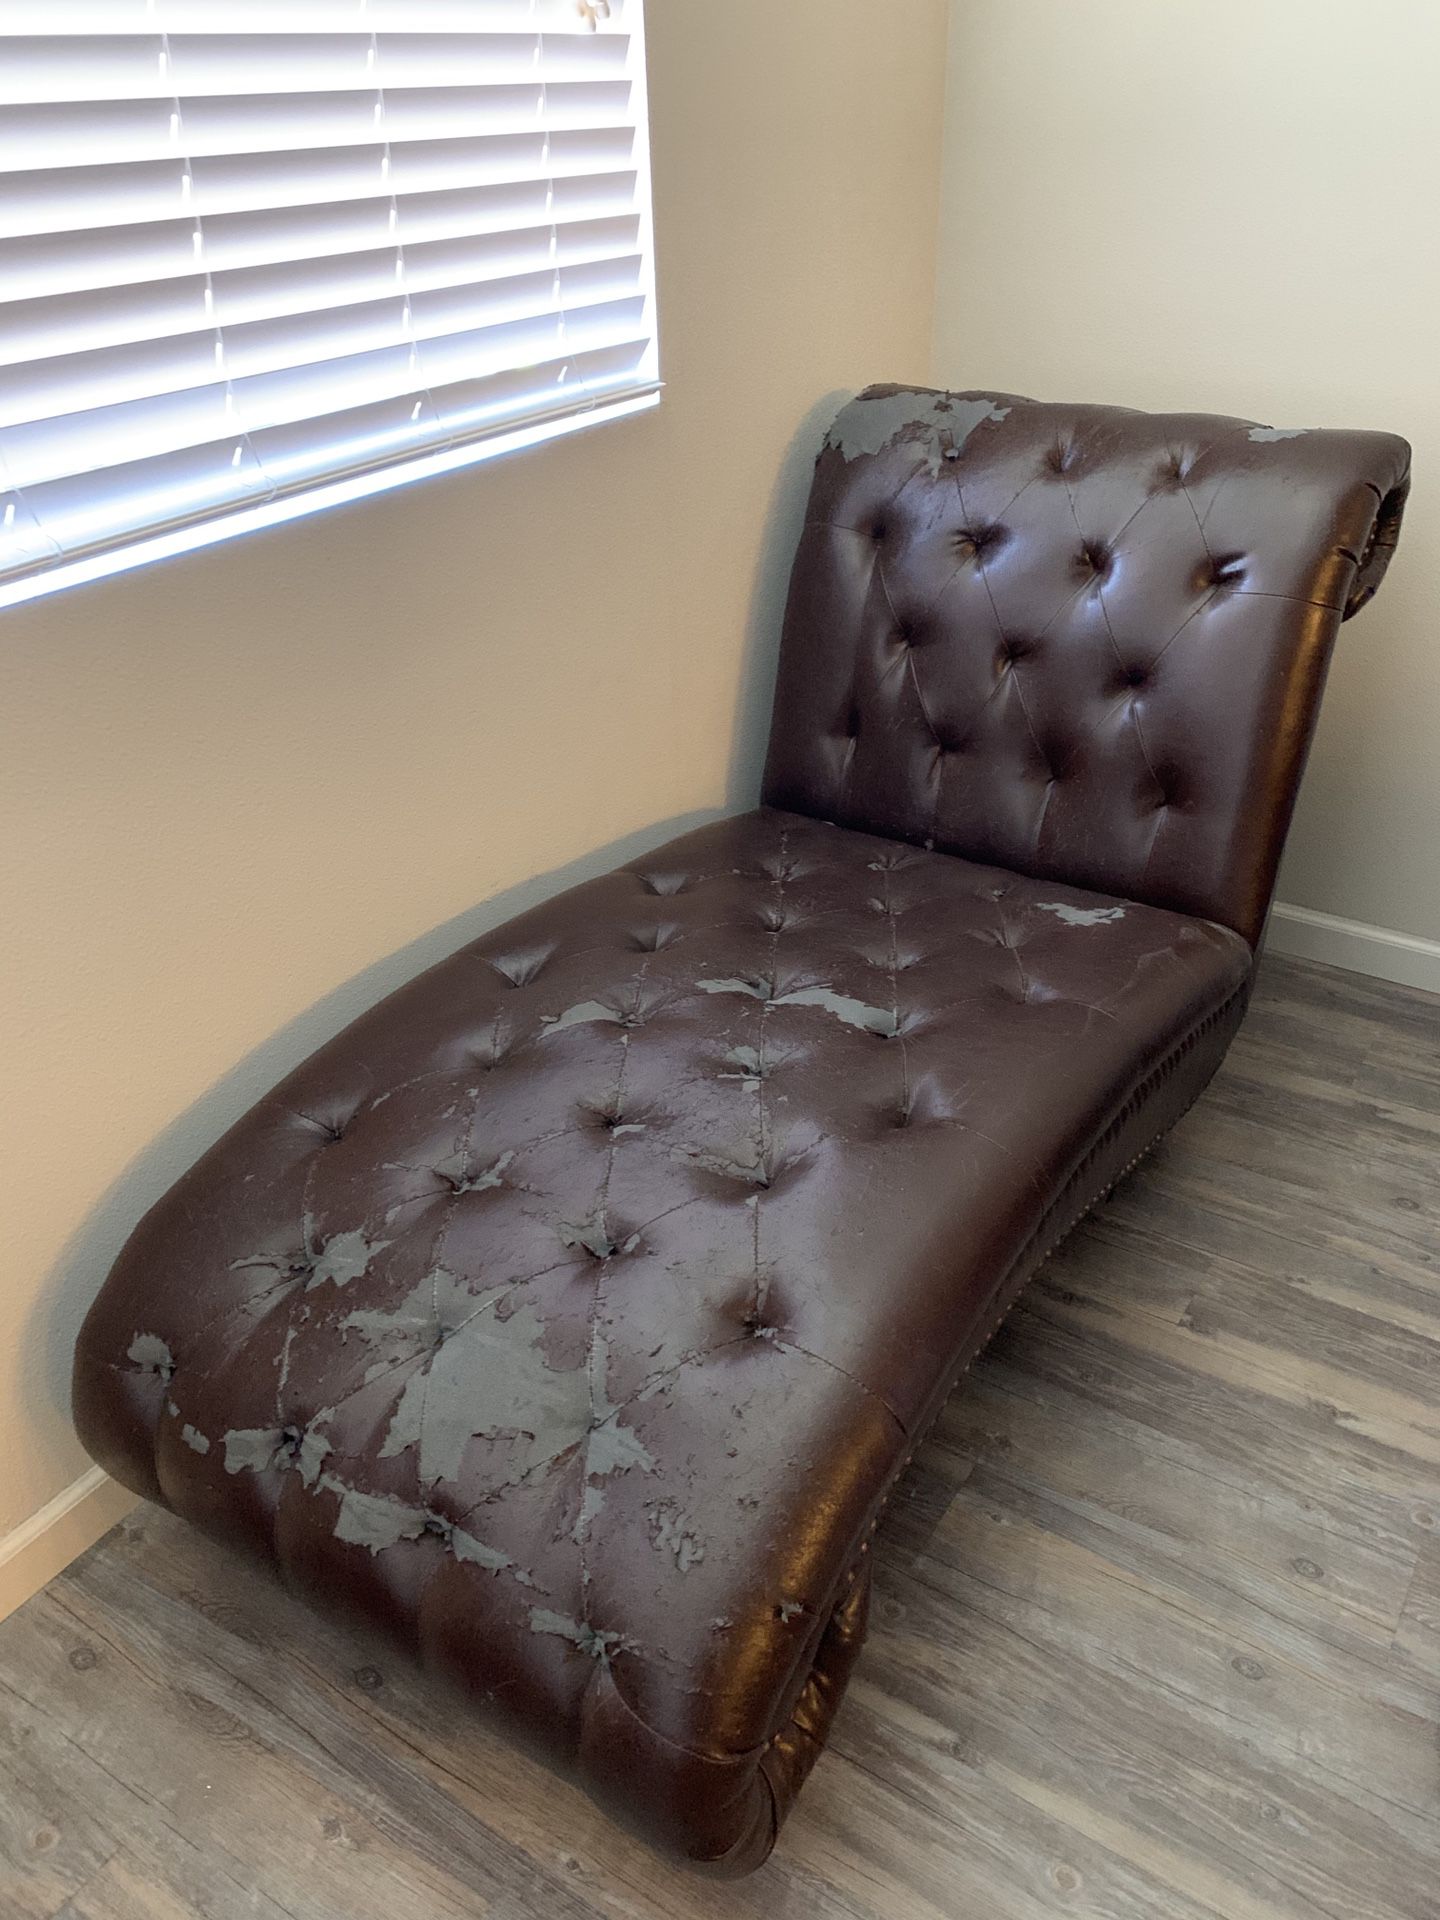 Free sofa couch brown leather furniture